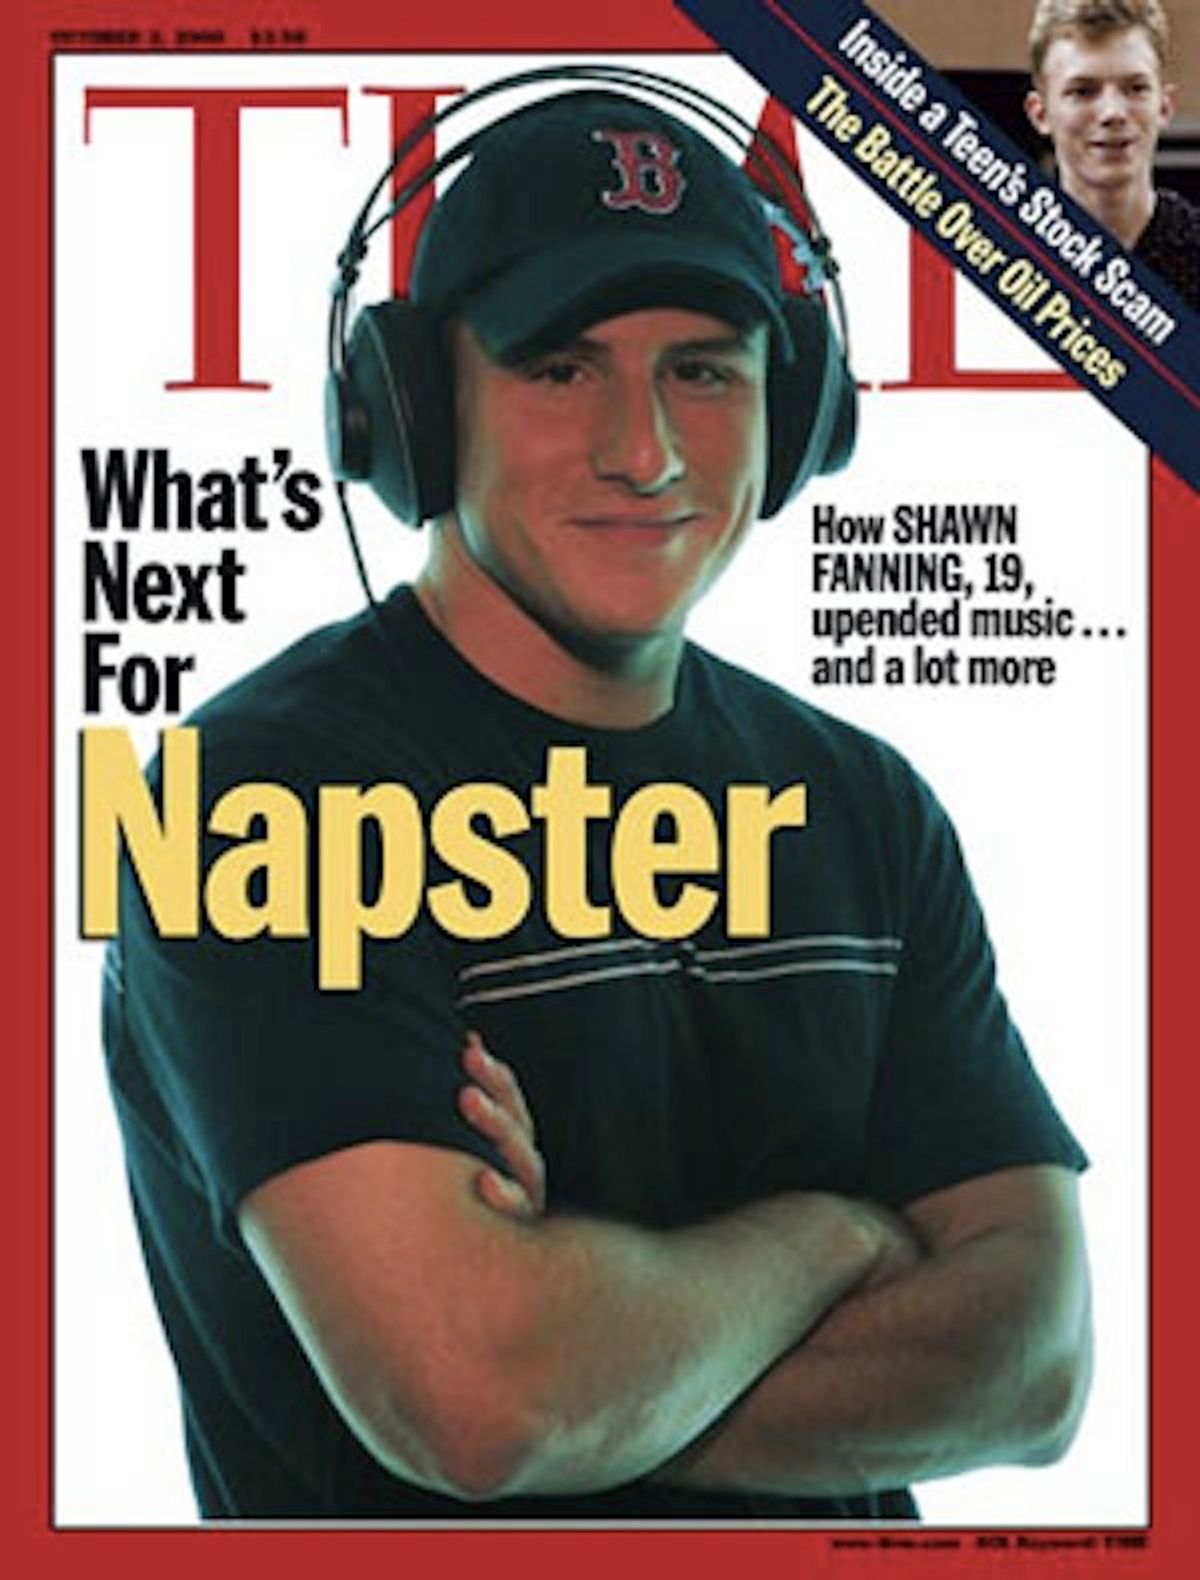 Napster's founder Shawn Fanning, in better days.